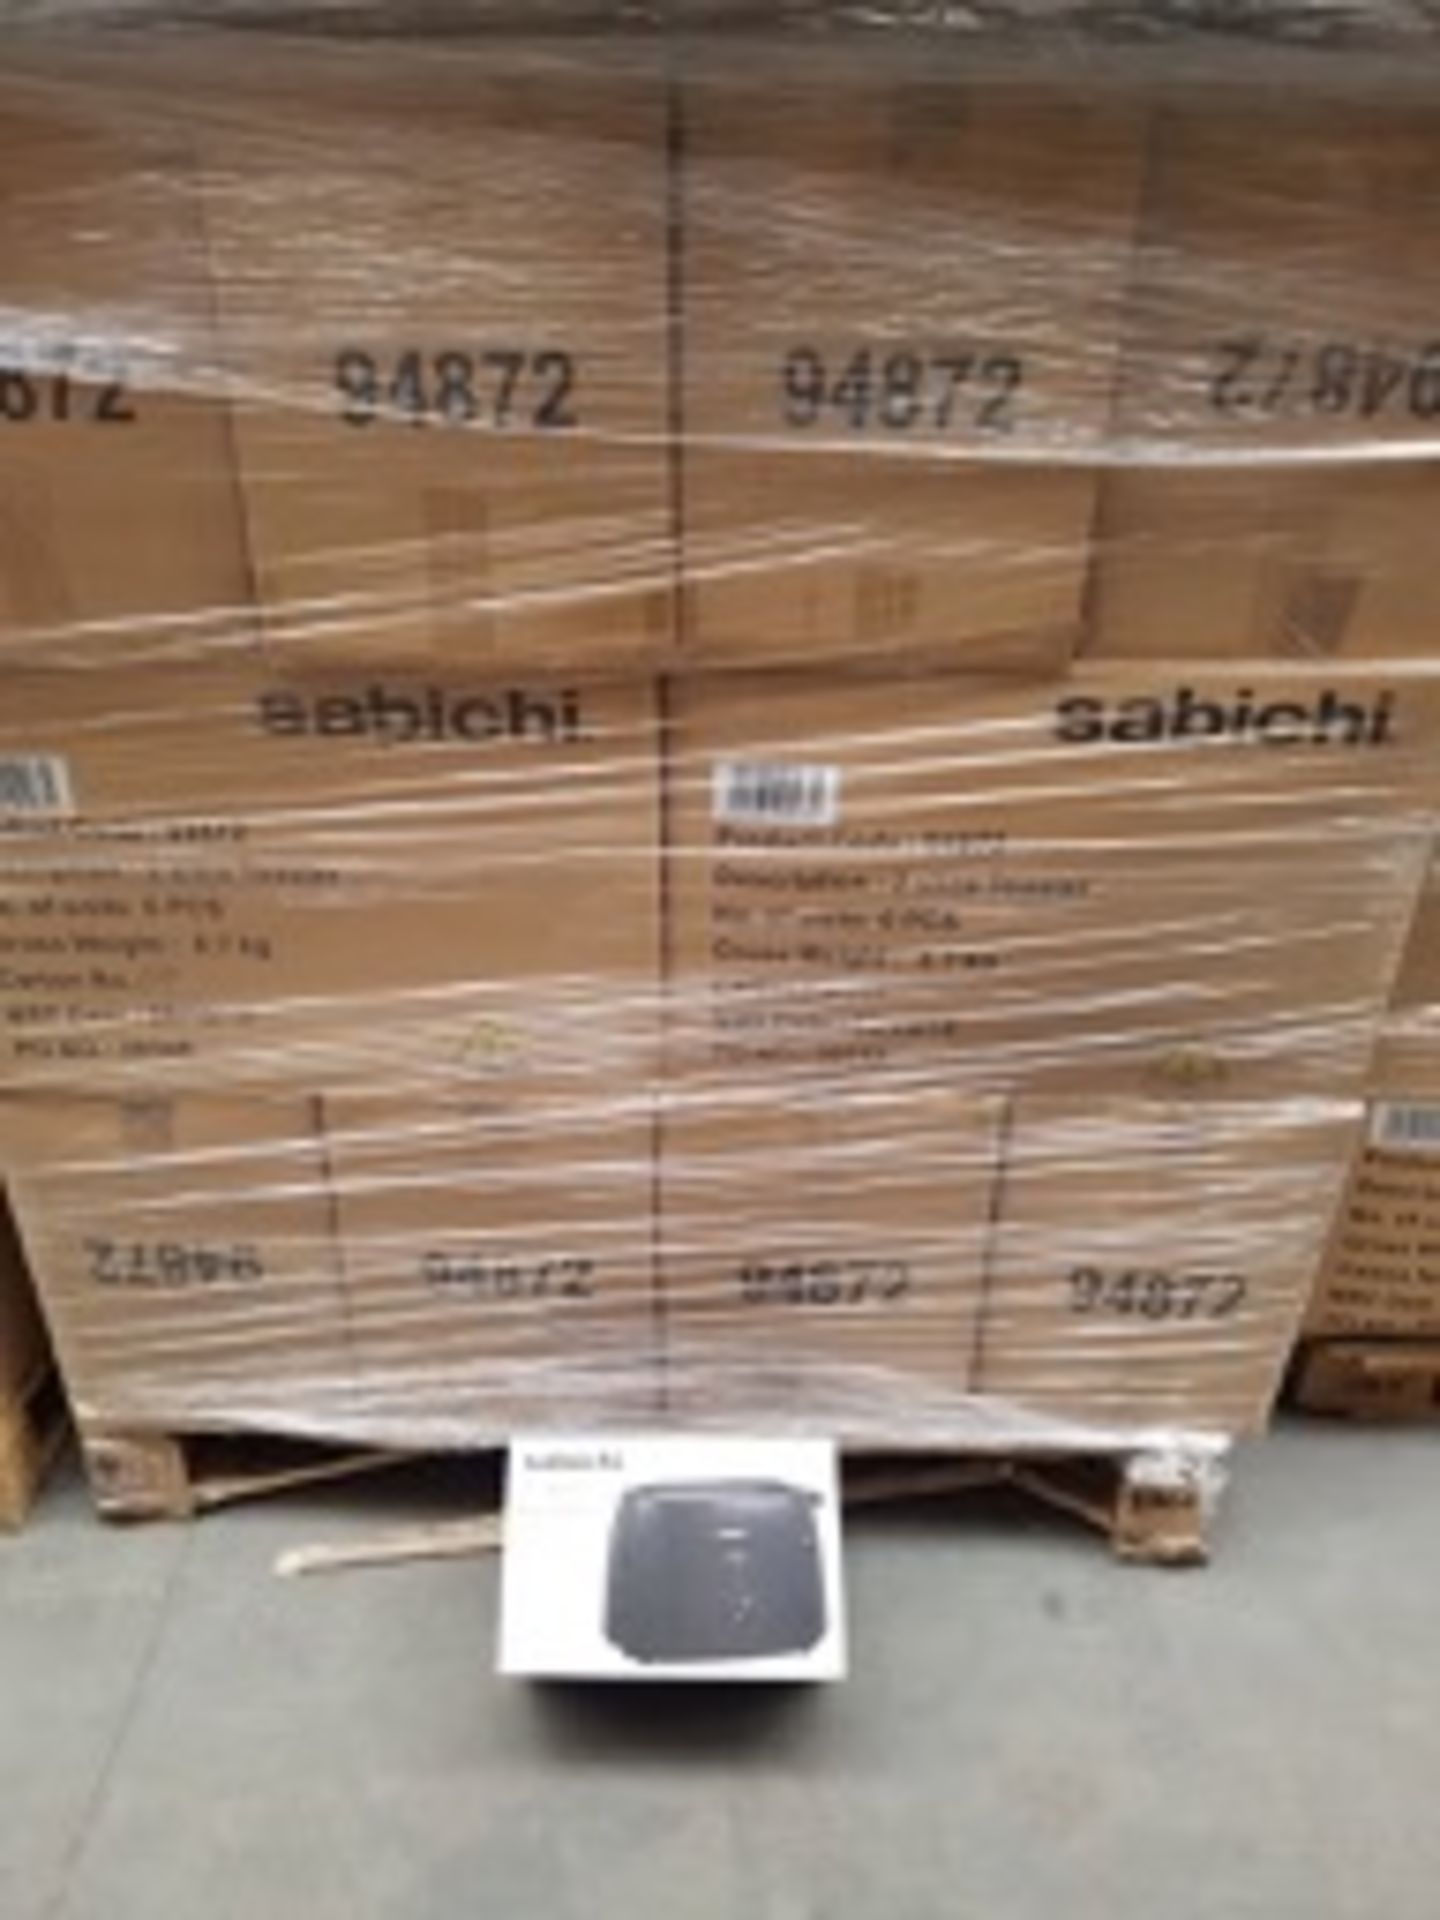 PALLET TO CONTAIN 96 x Sabichi 2 Slice Toasters with Viable Browning Control & Cord Storage. RRP £